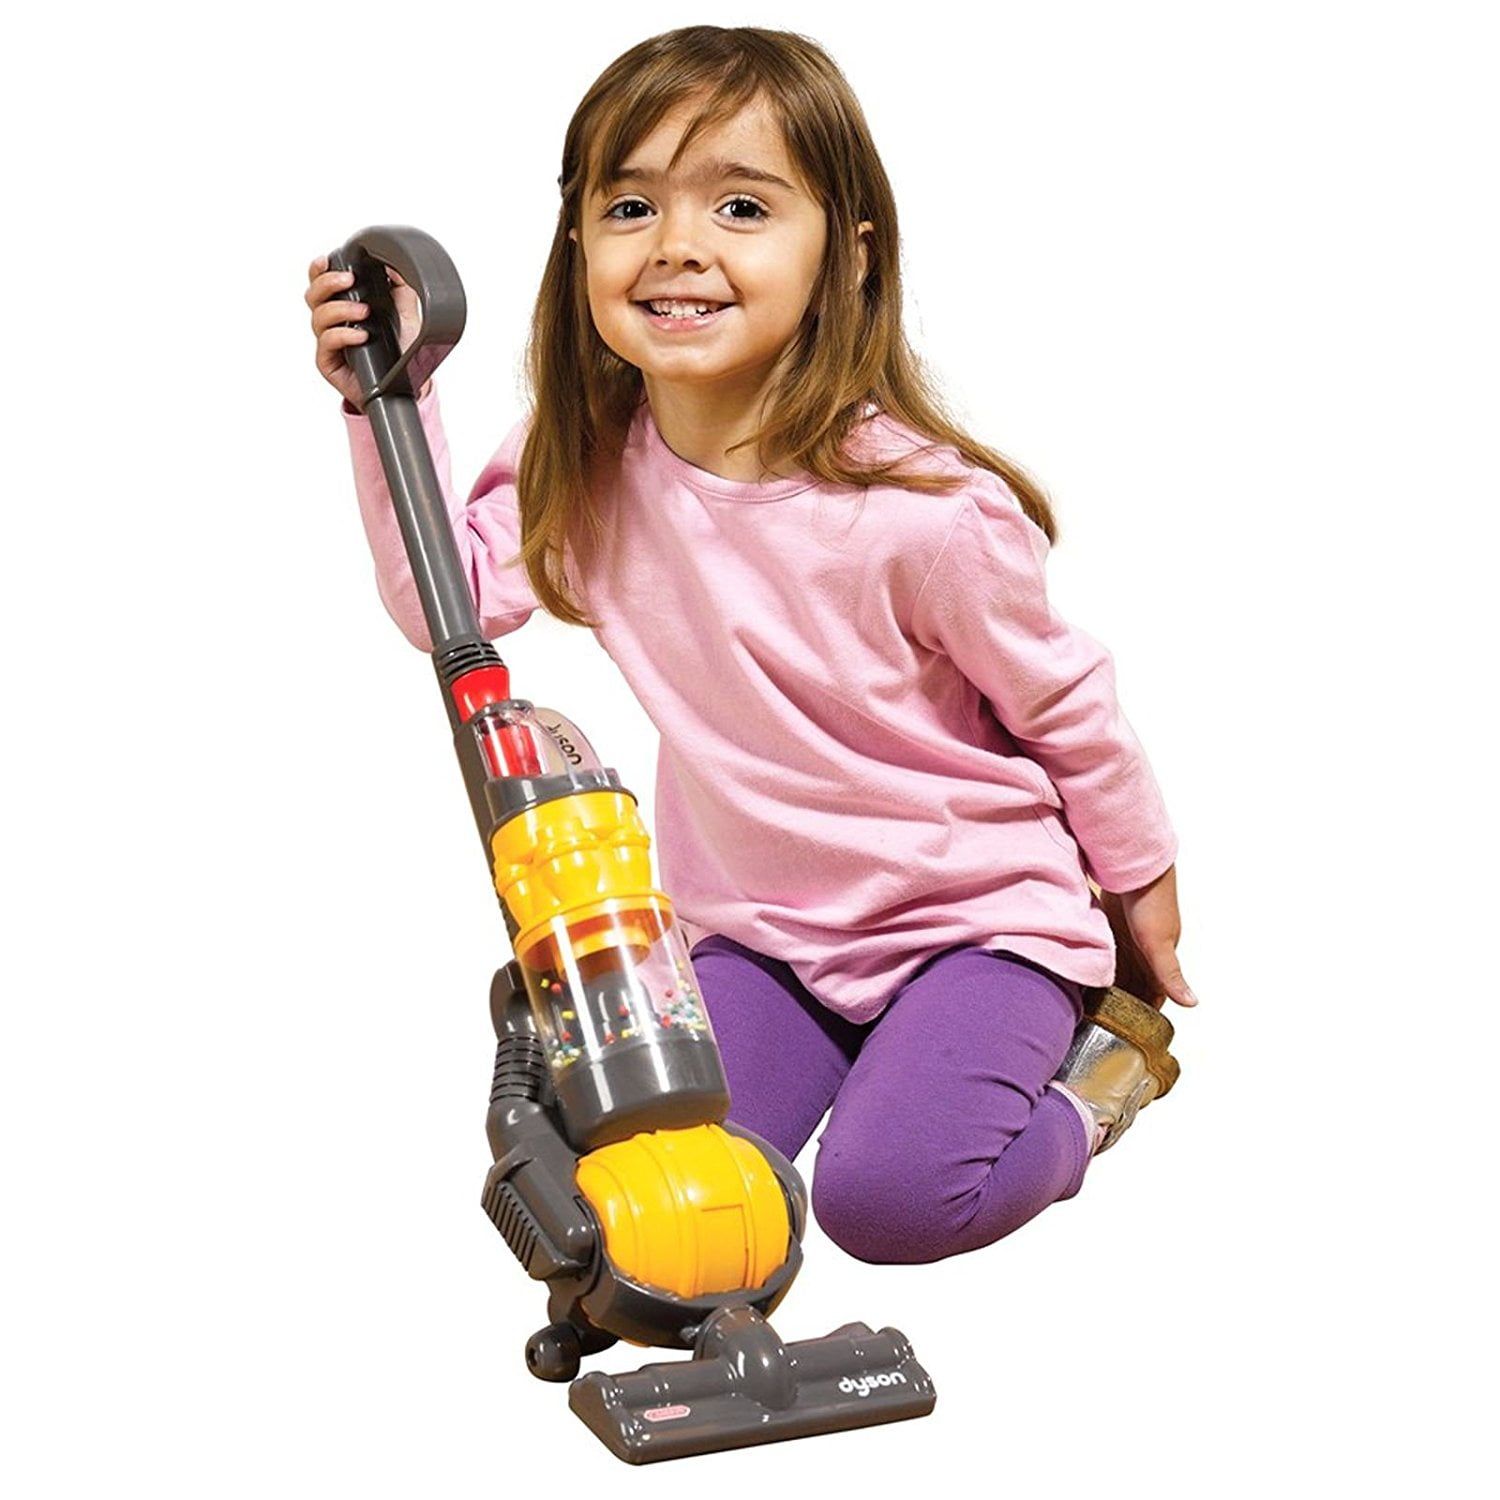 Dyson DC14 Toy Kids Ball Vacuum Cleaner, Realistic role play toy ideal